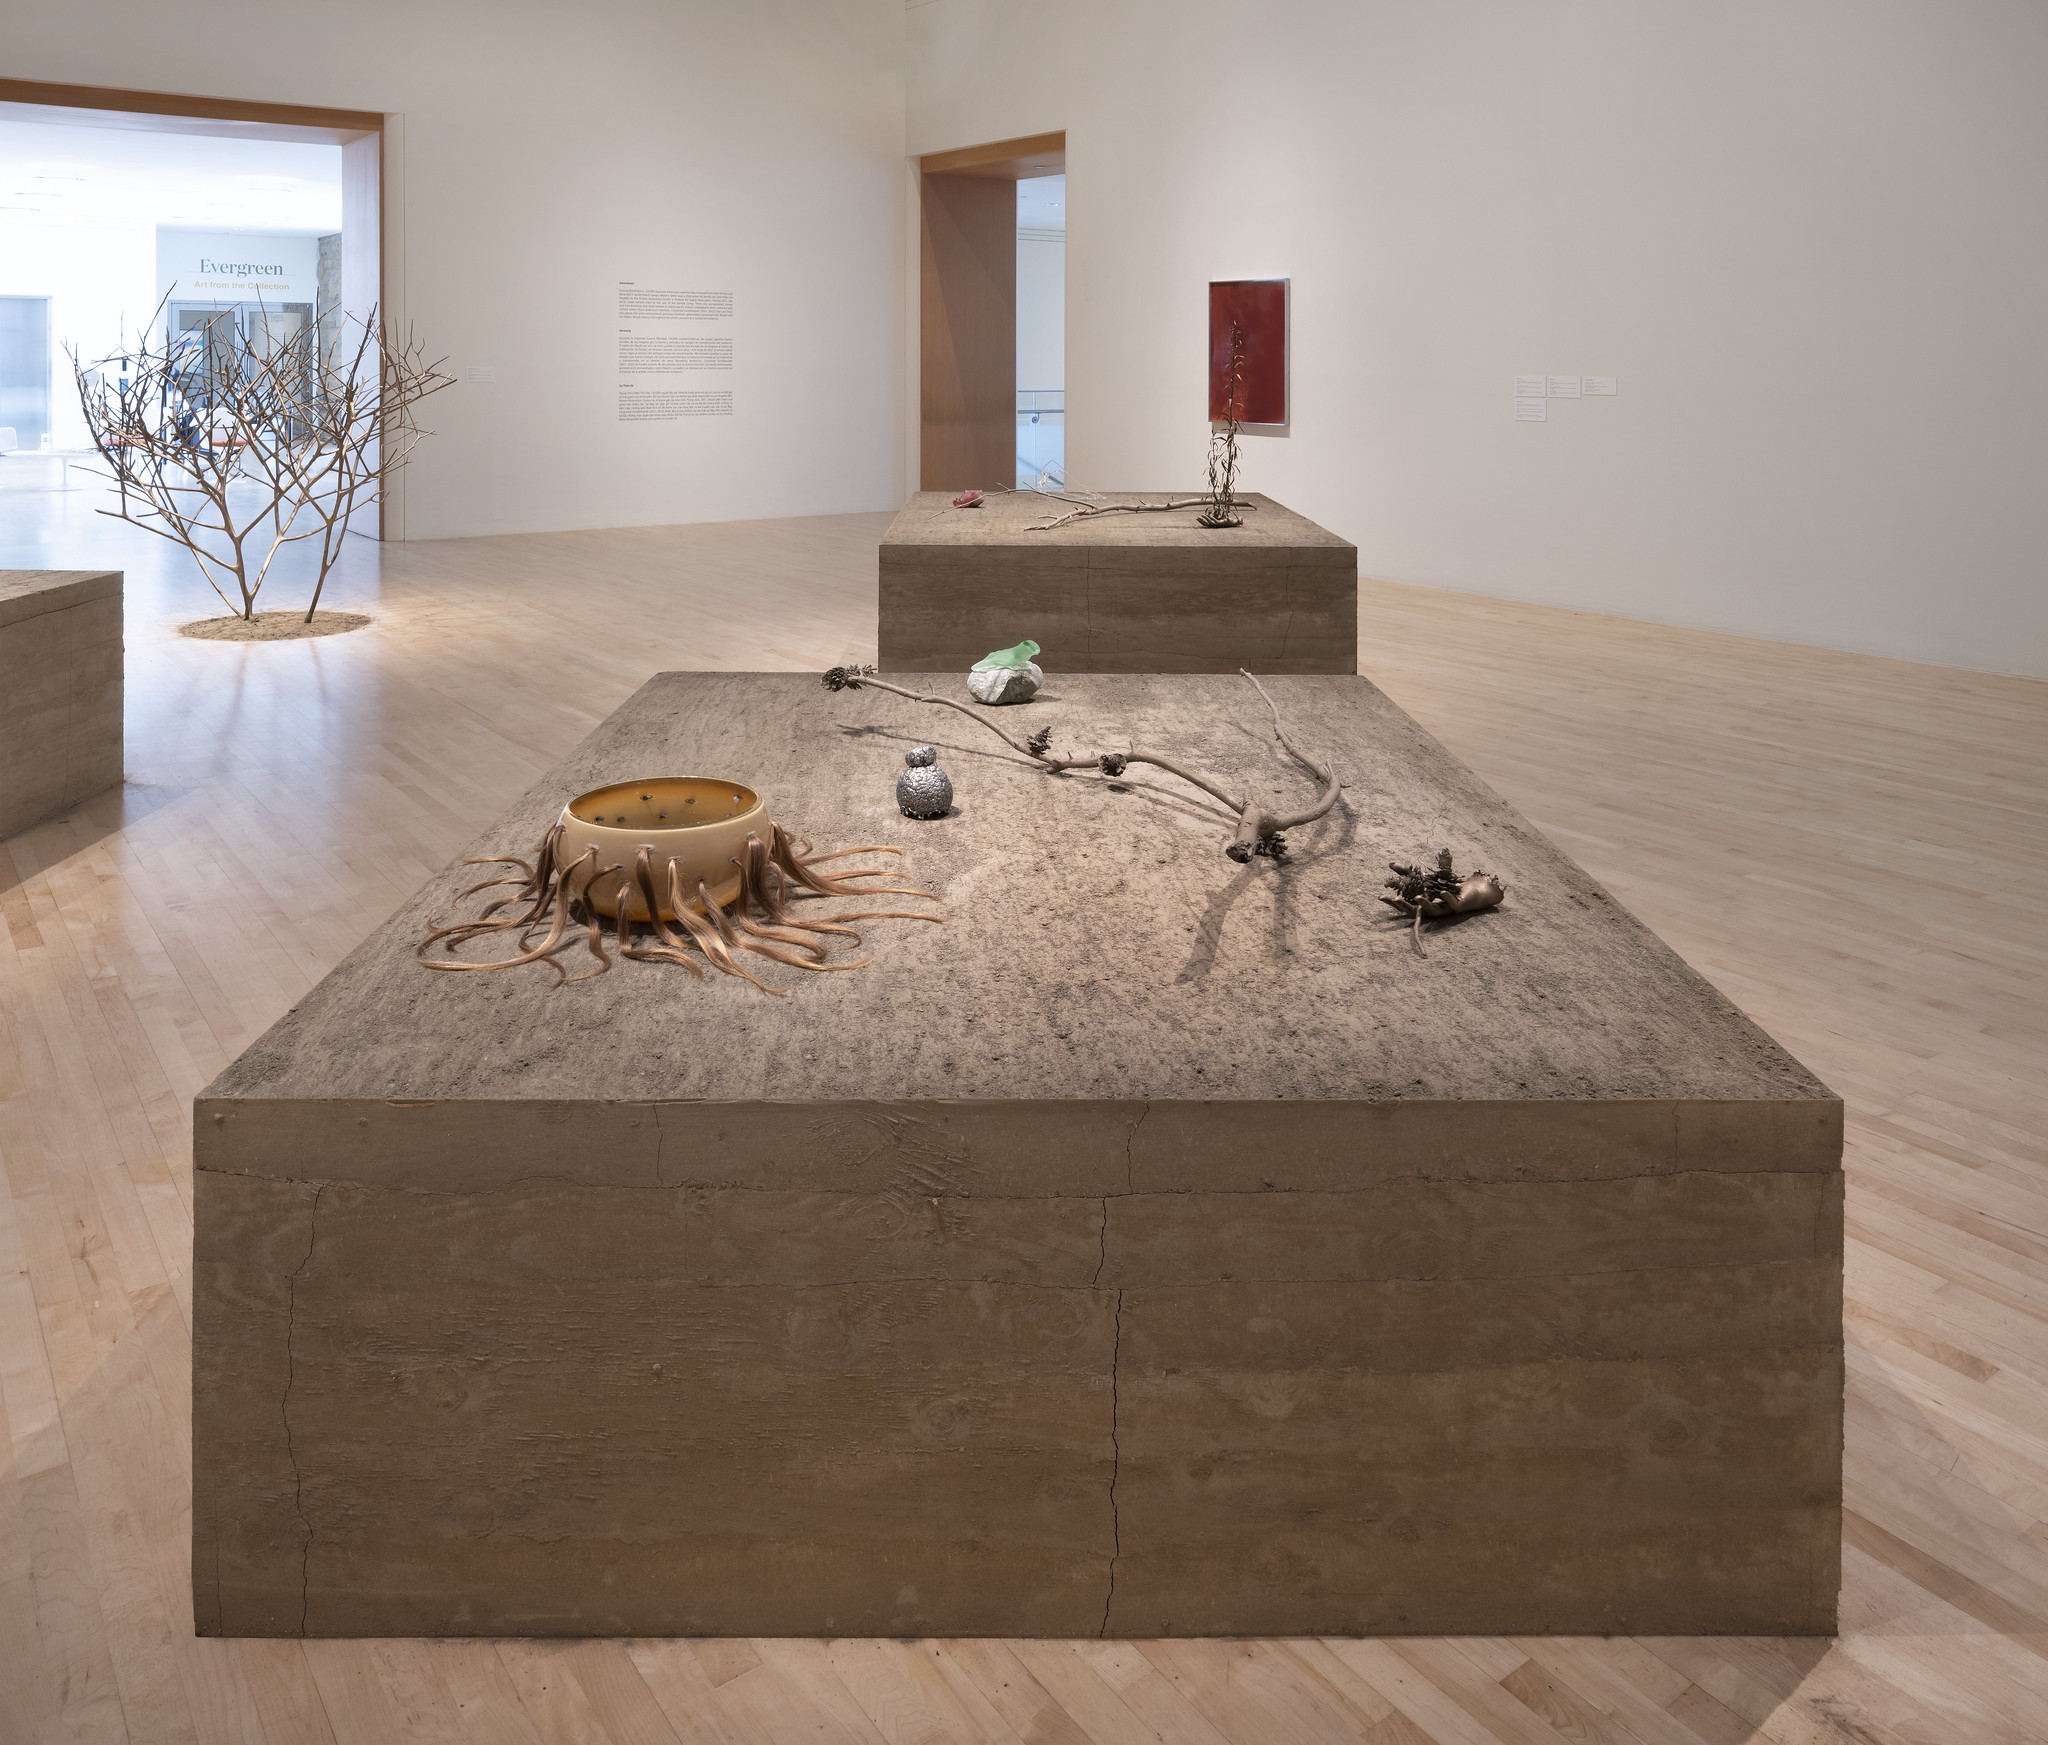 Gallery view of earthen rectangular pedestal covered in small glass and metal cast objects 